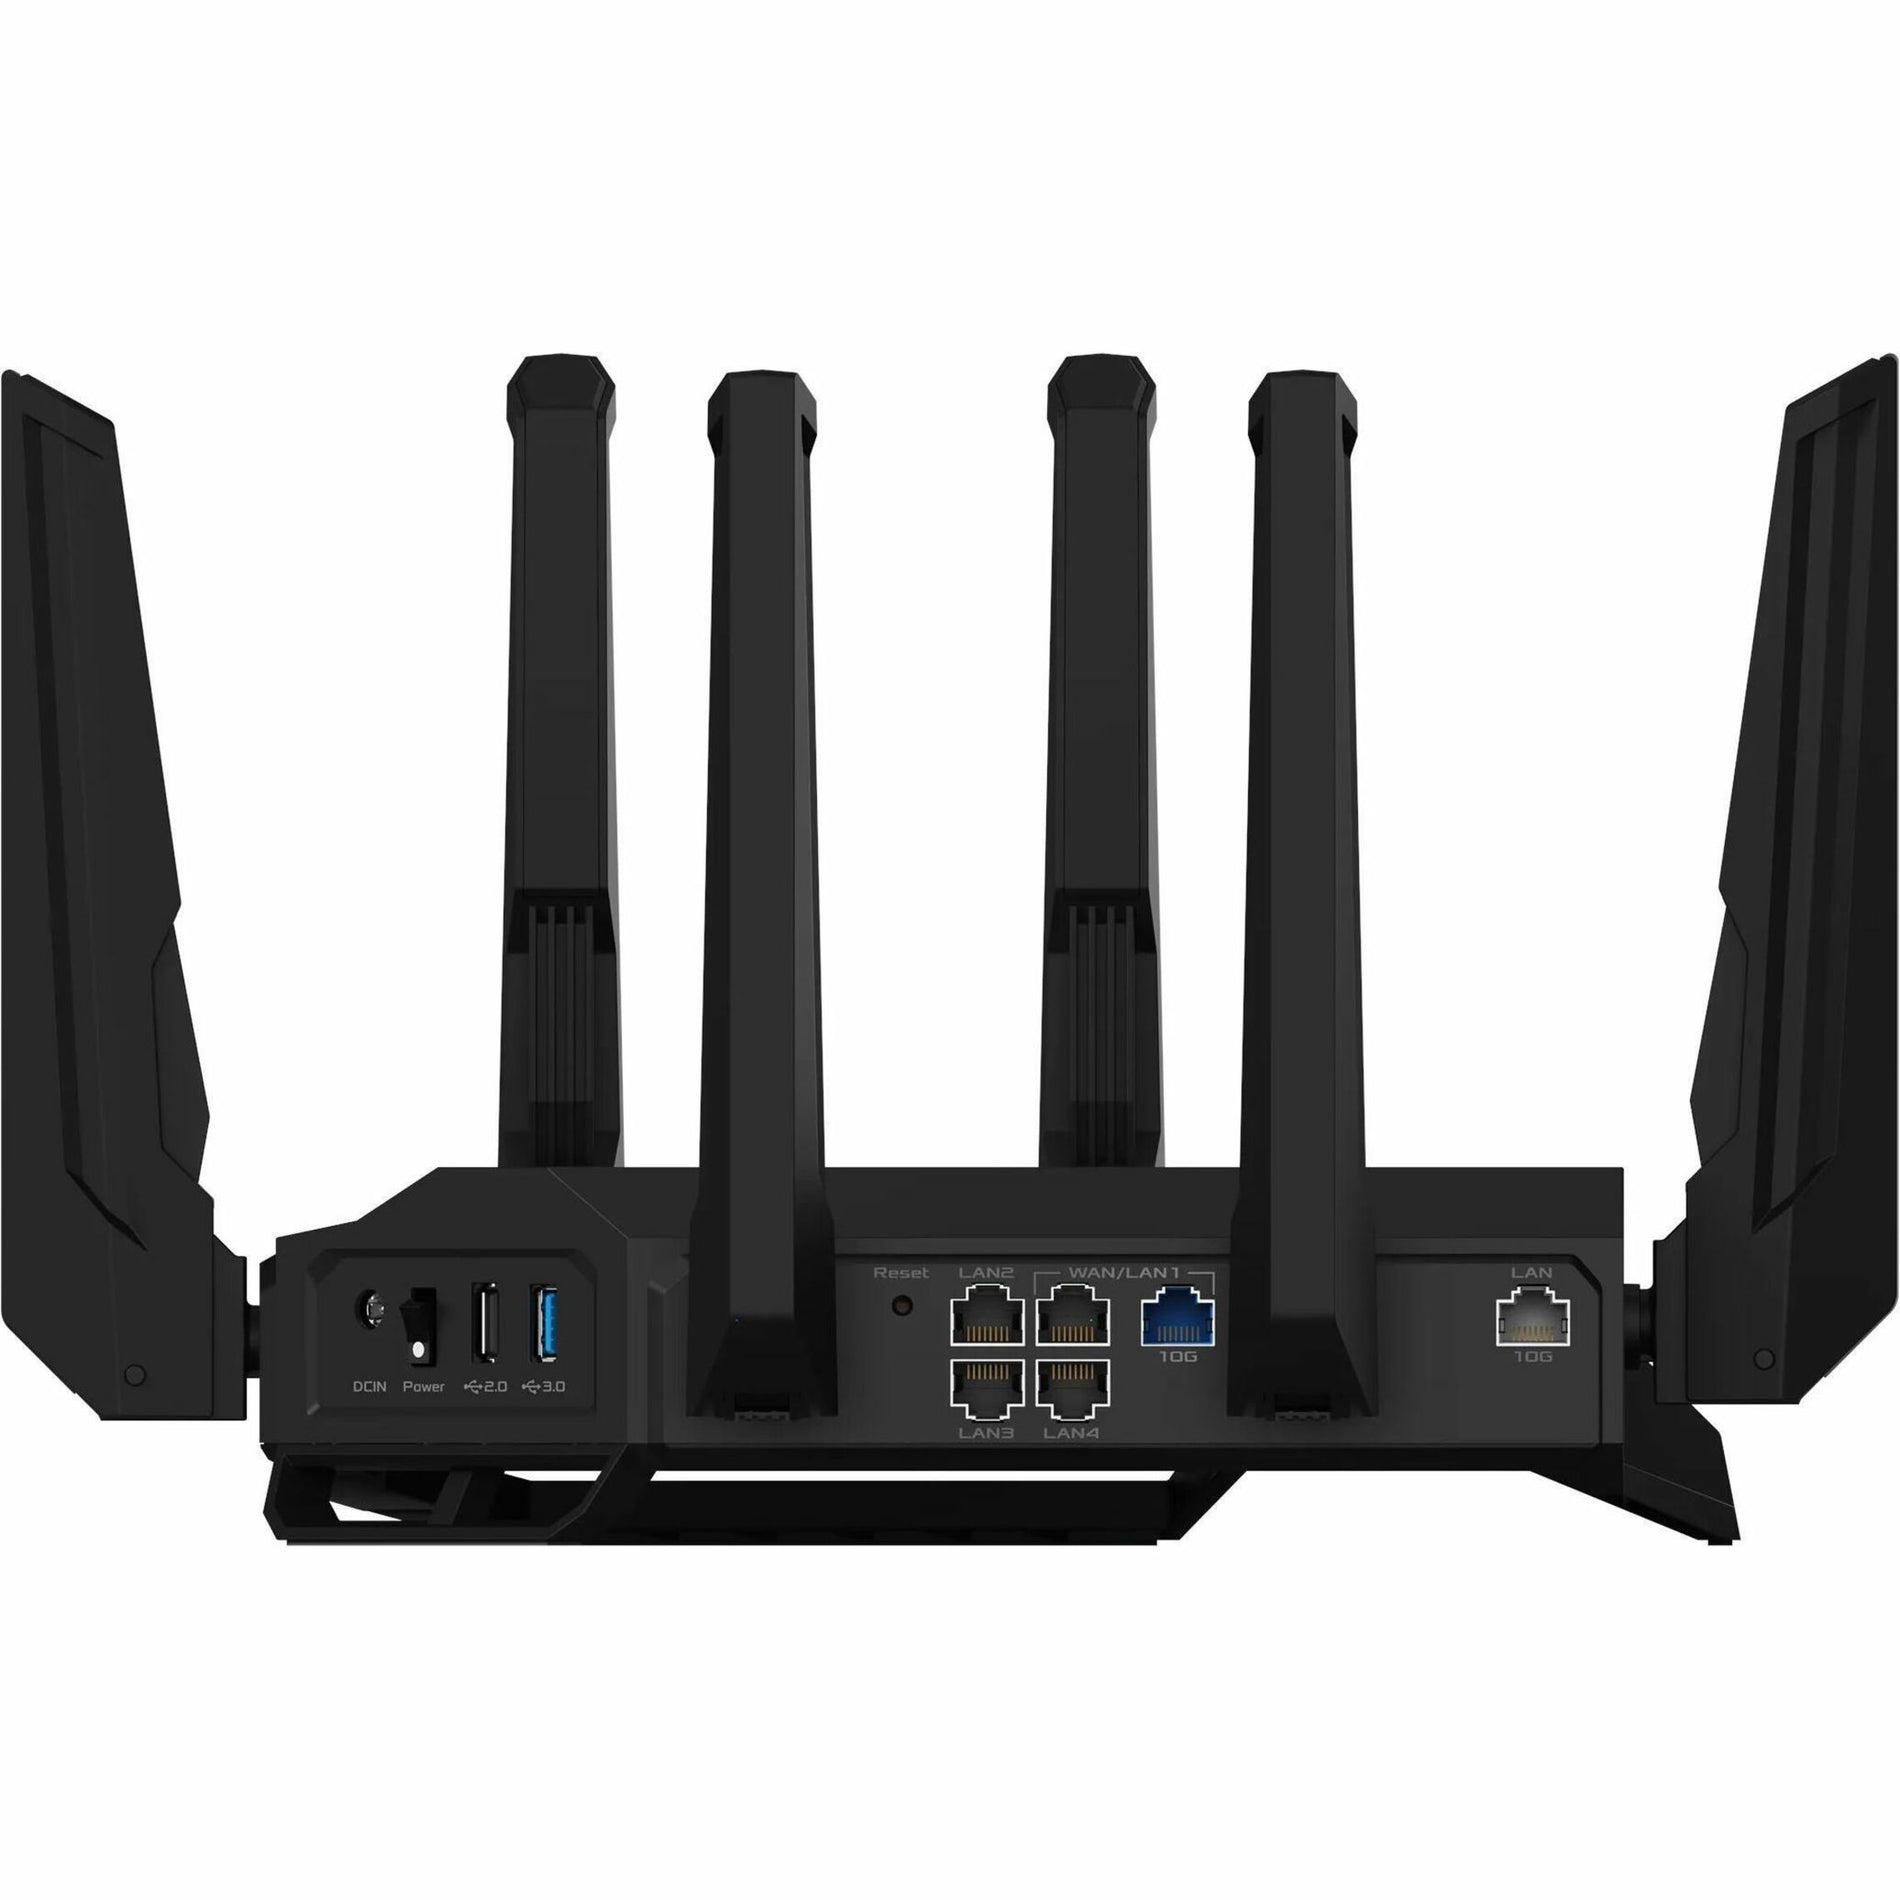 Asus RT-BE96U Wireless Router, Wi-Fi 7 Ethernet, Tri Band, 2.28 GB/s Transmission Speed